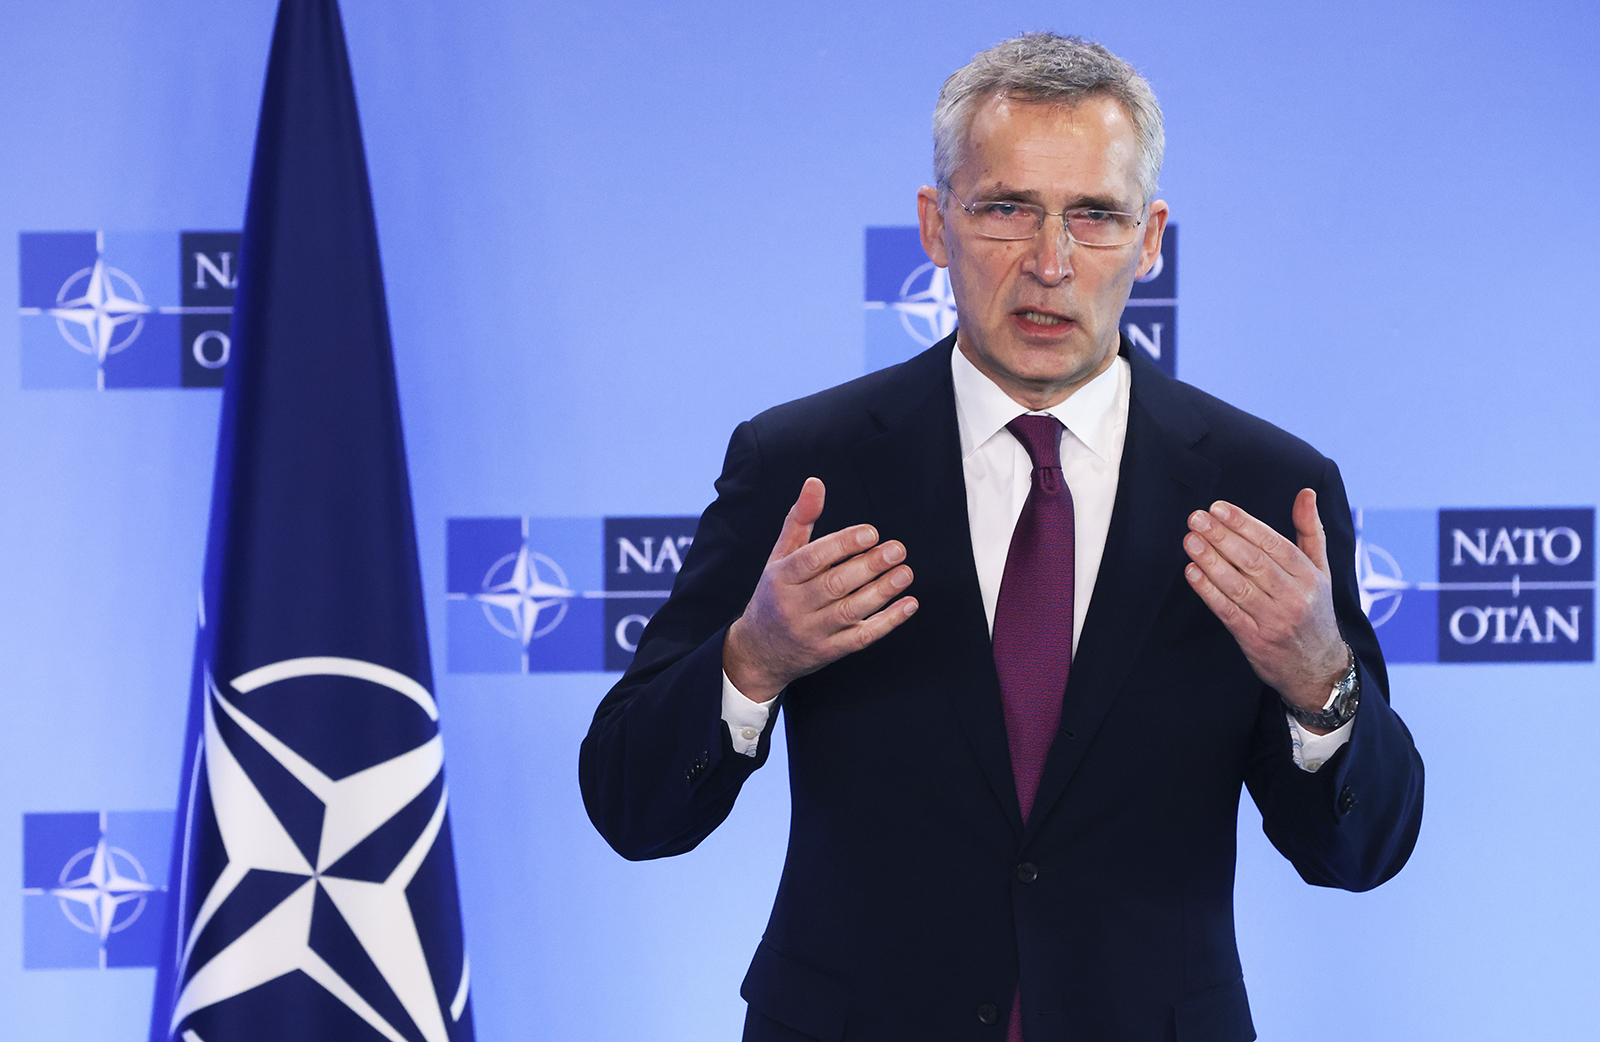 NATO Secretary General Jens Stoltenberg speaks during a press statement prior to an extraordinary NATO foreign ministers meeting at NATO headquarters in Brussels, Belgium, on March 4.